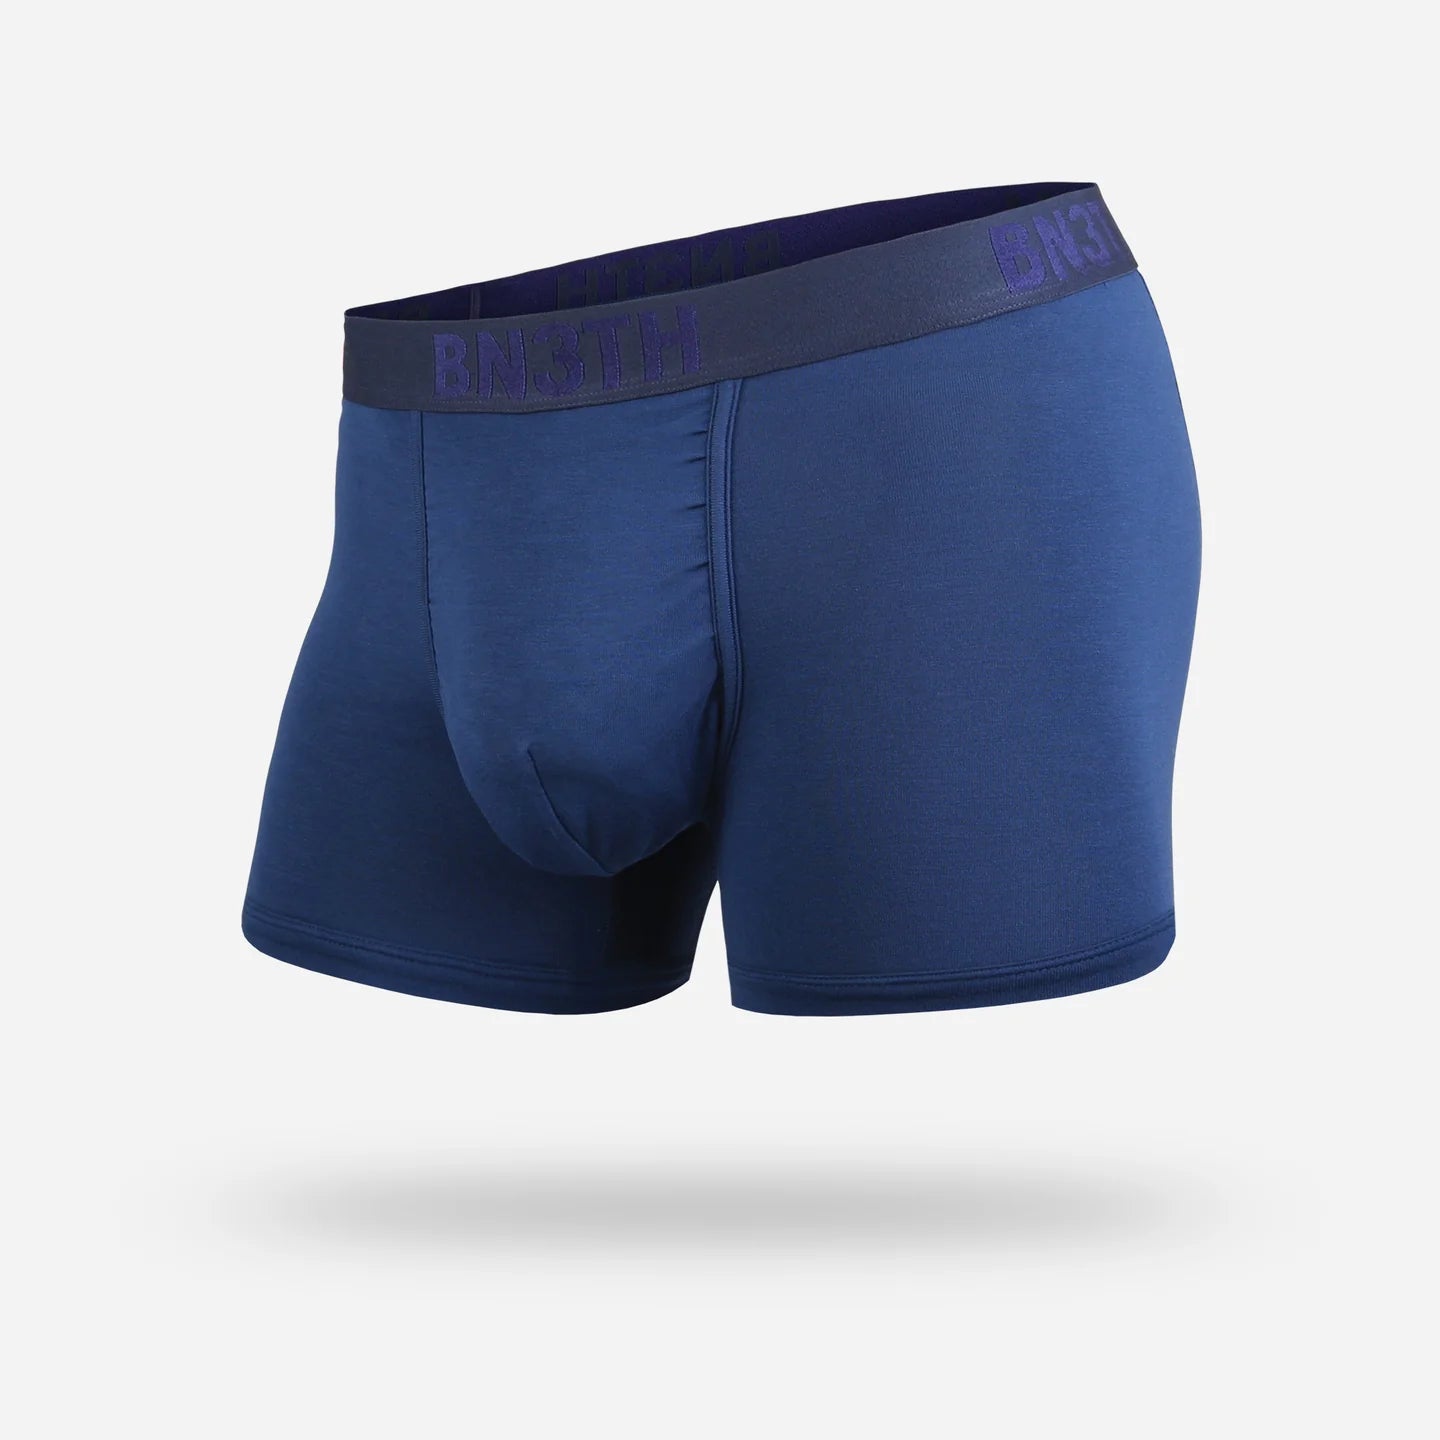 BN3TH Classic Trunk Solid Navy